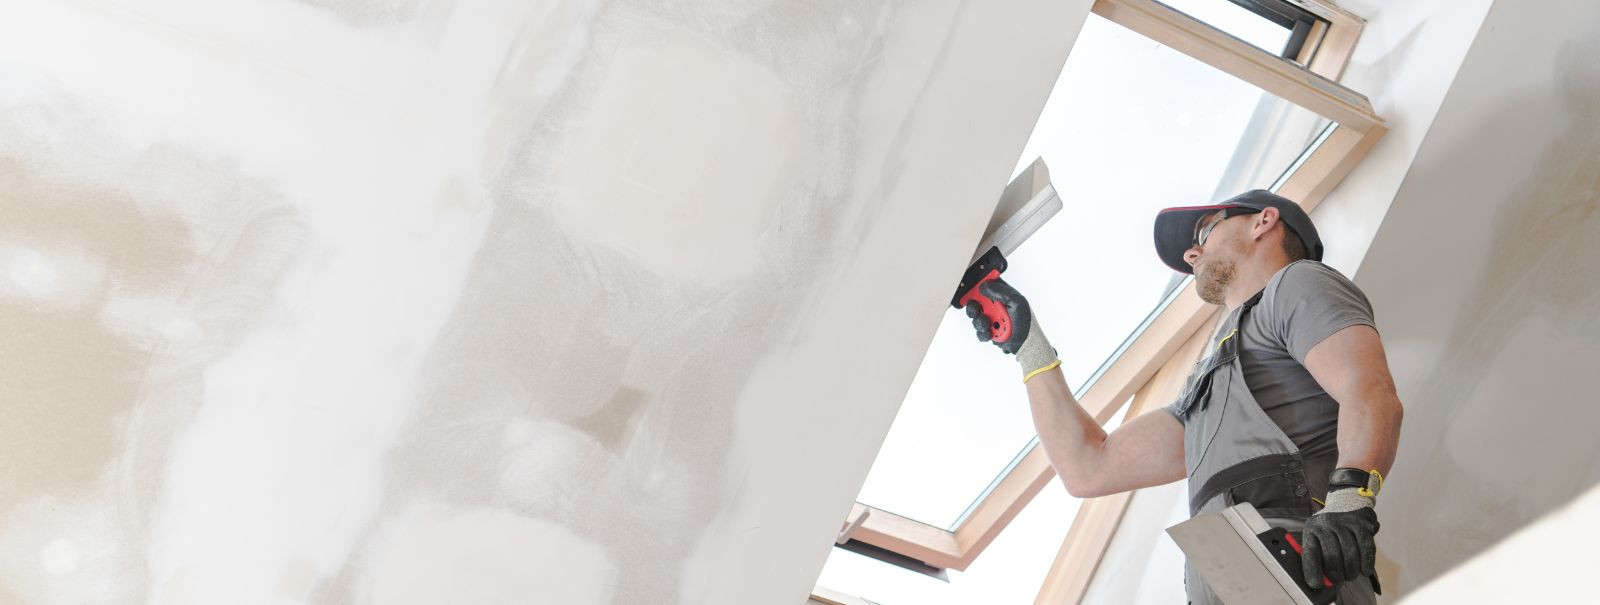 Home finishing refers to the final touches that are applied to a construction project, which can include a variety of elements such as paint, flooring, fixtures